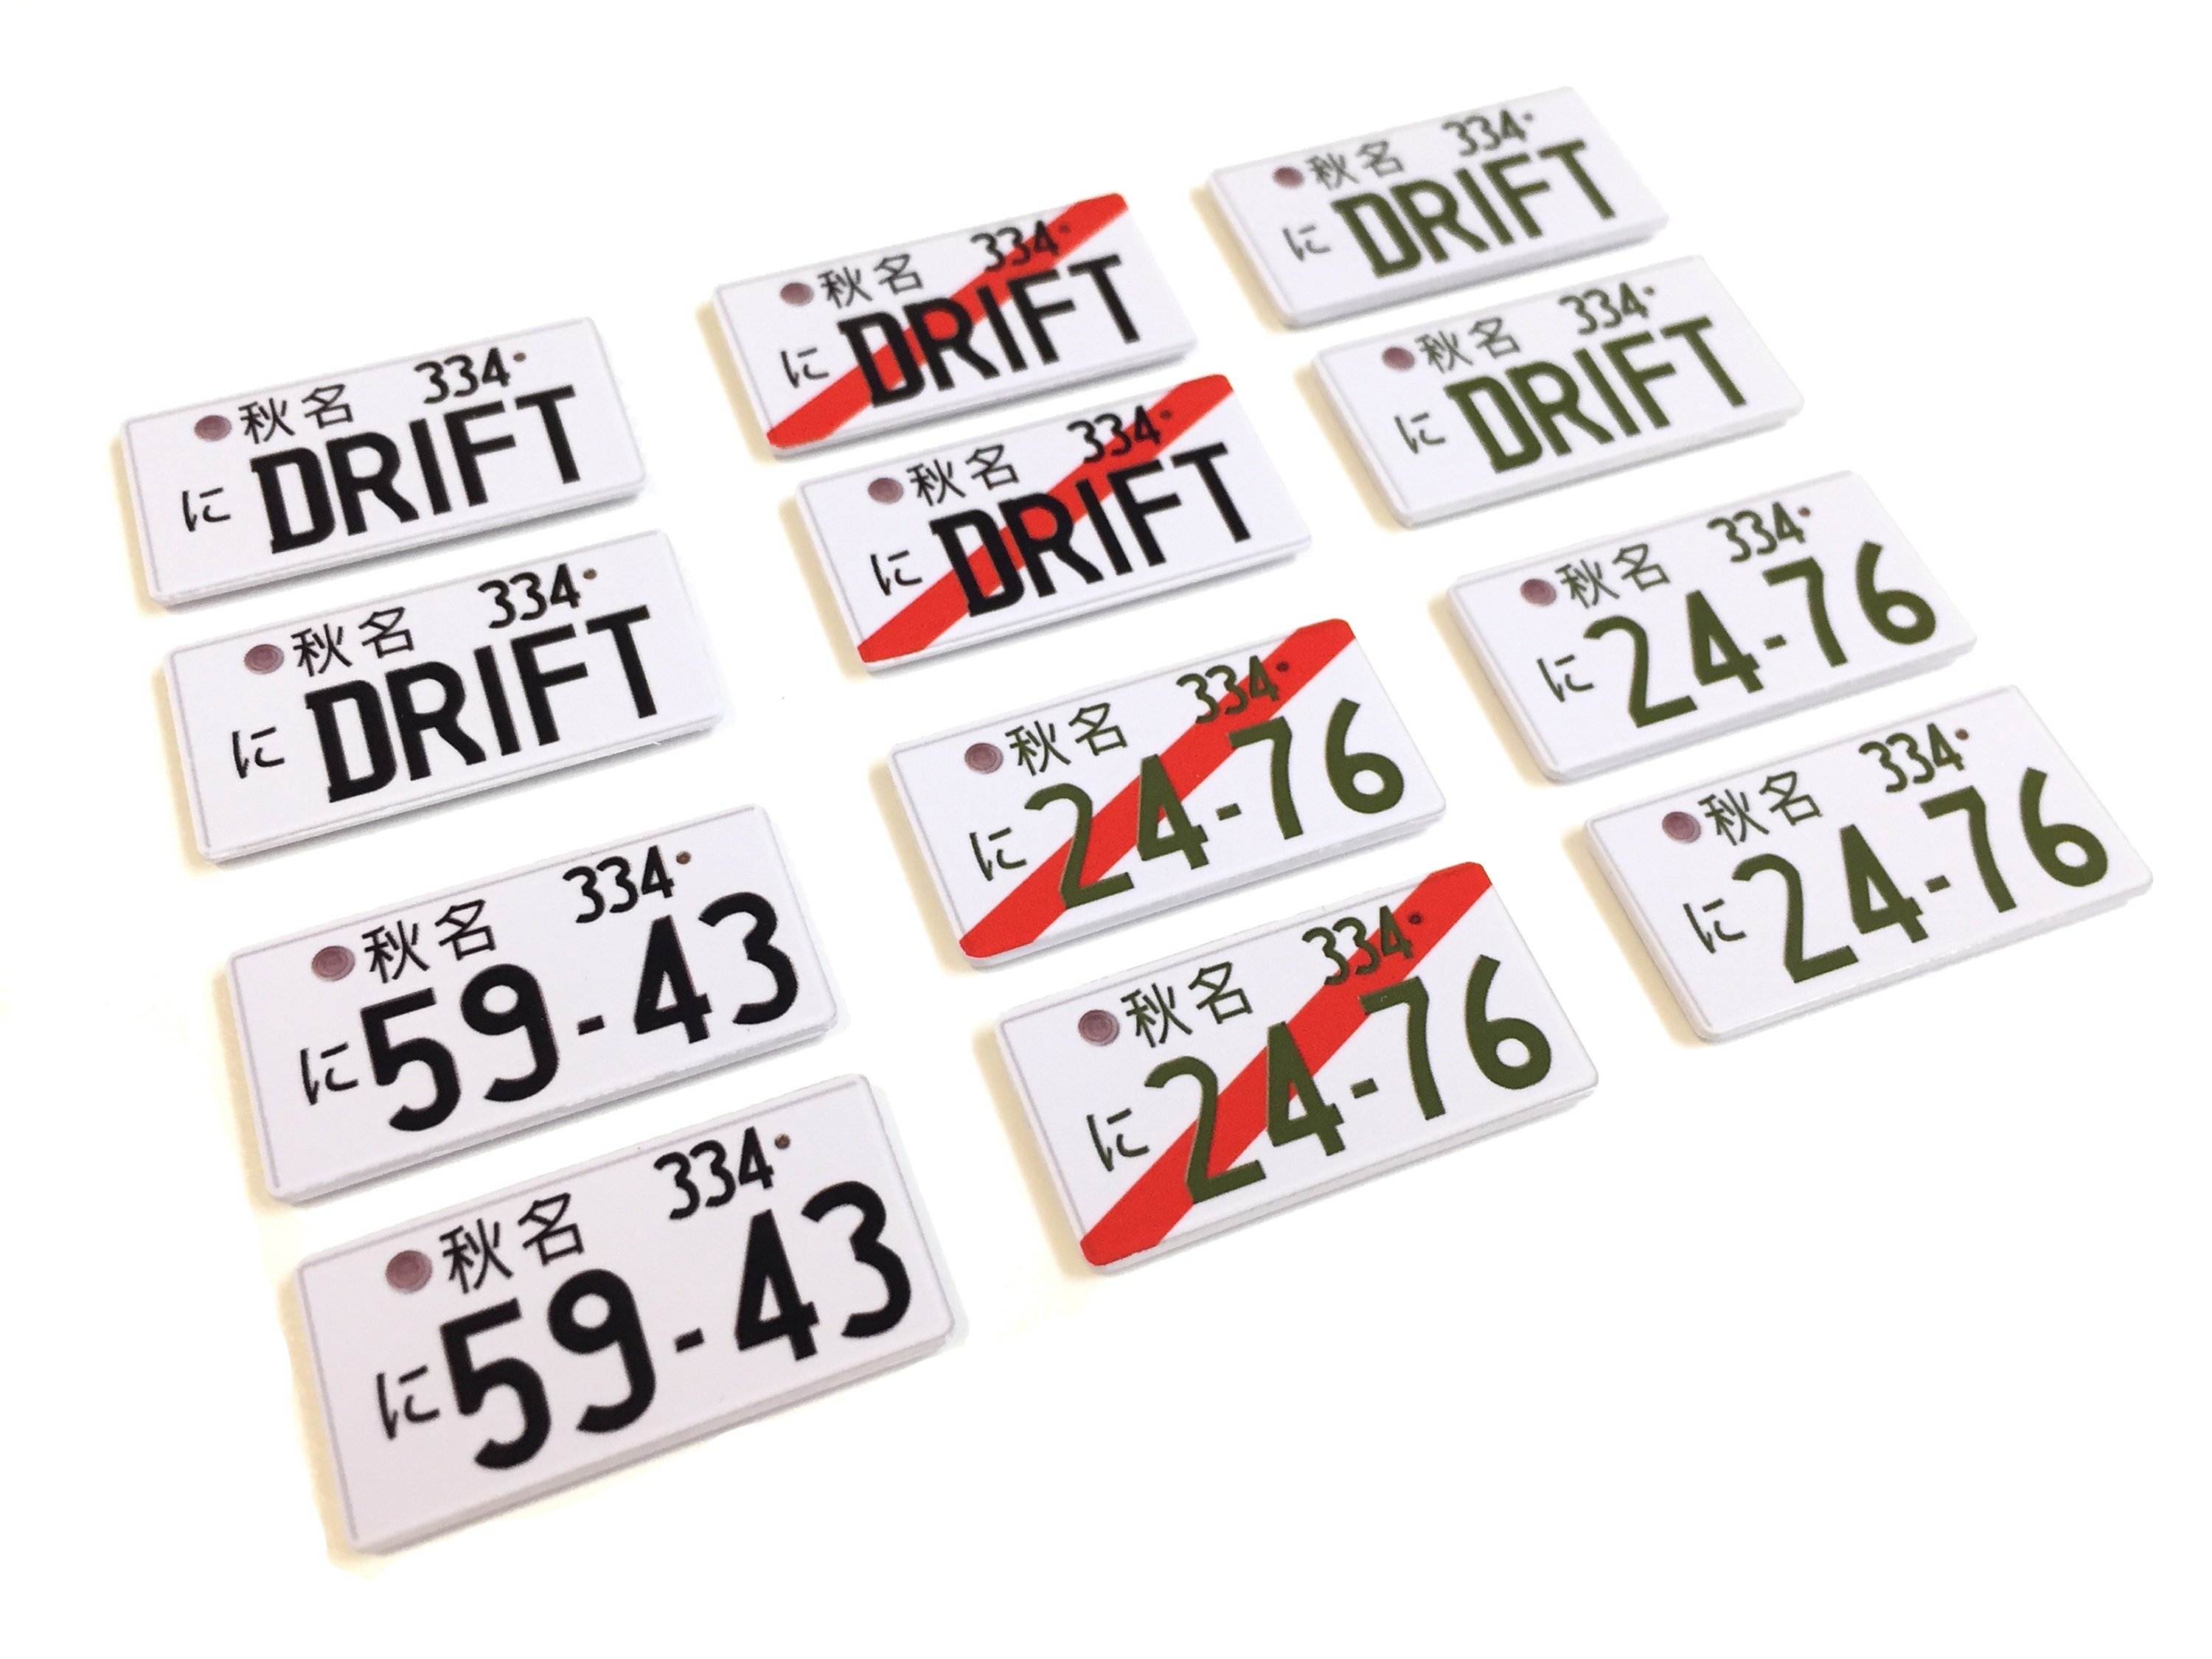 ONTARIO CANADA COMMERCIAL LICENSE PLATE DECALS FOR 1:24 SCALE TRUCKS 